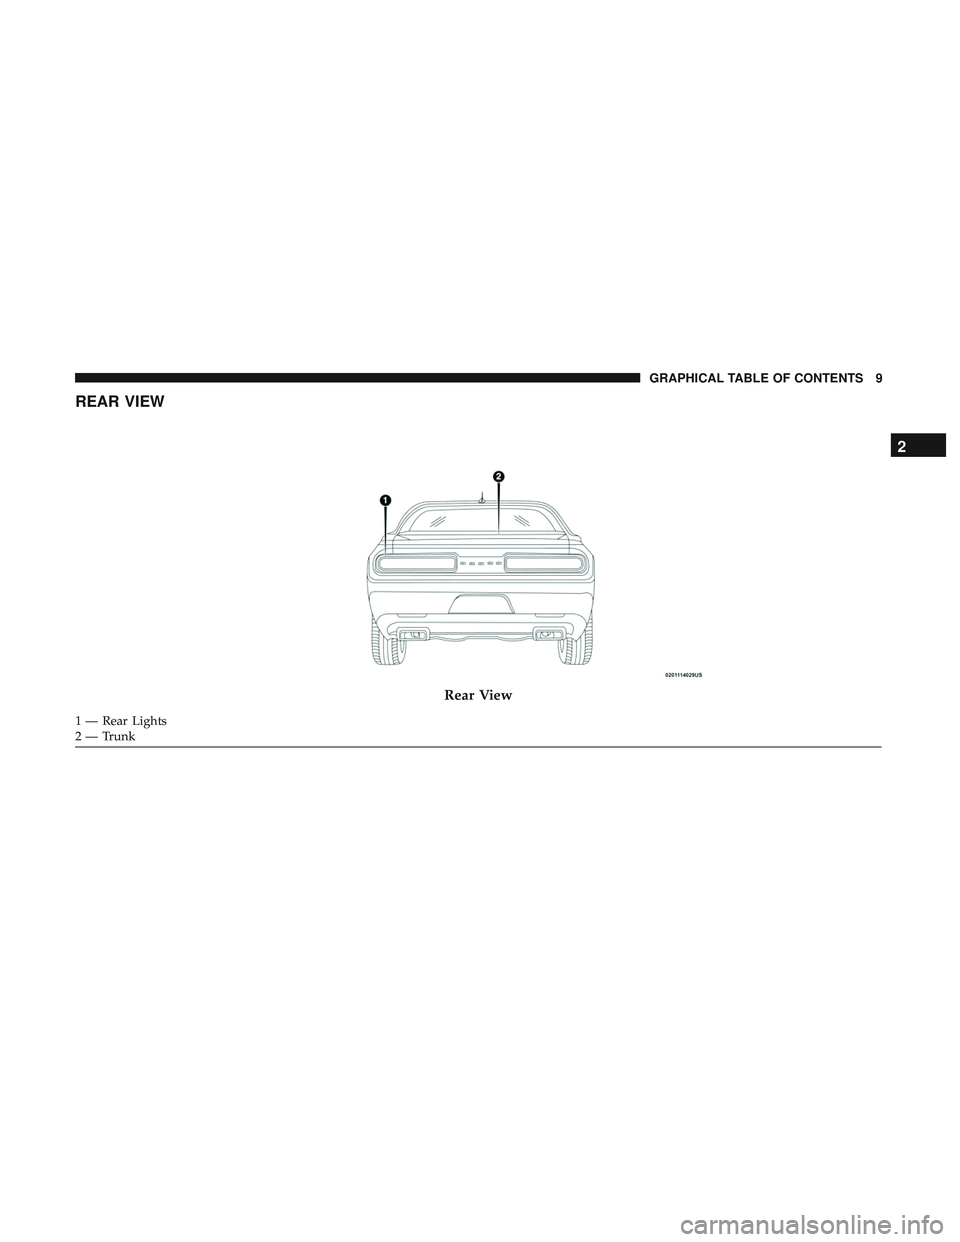 DODGE CHALLENGER 2019 User Guide REAR VIEW
Rear View
1 — Rear Lights
2 — Trunk
2
GRAPHICAL TABLE OF CONTENTS 9 